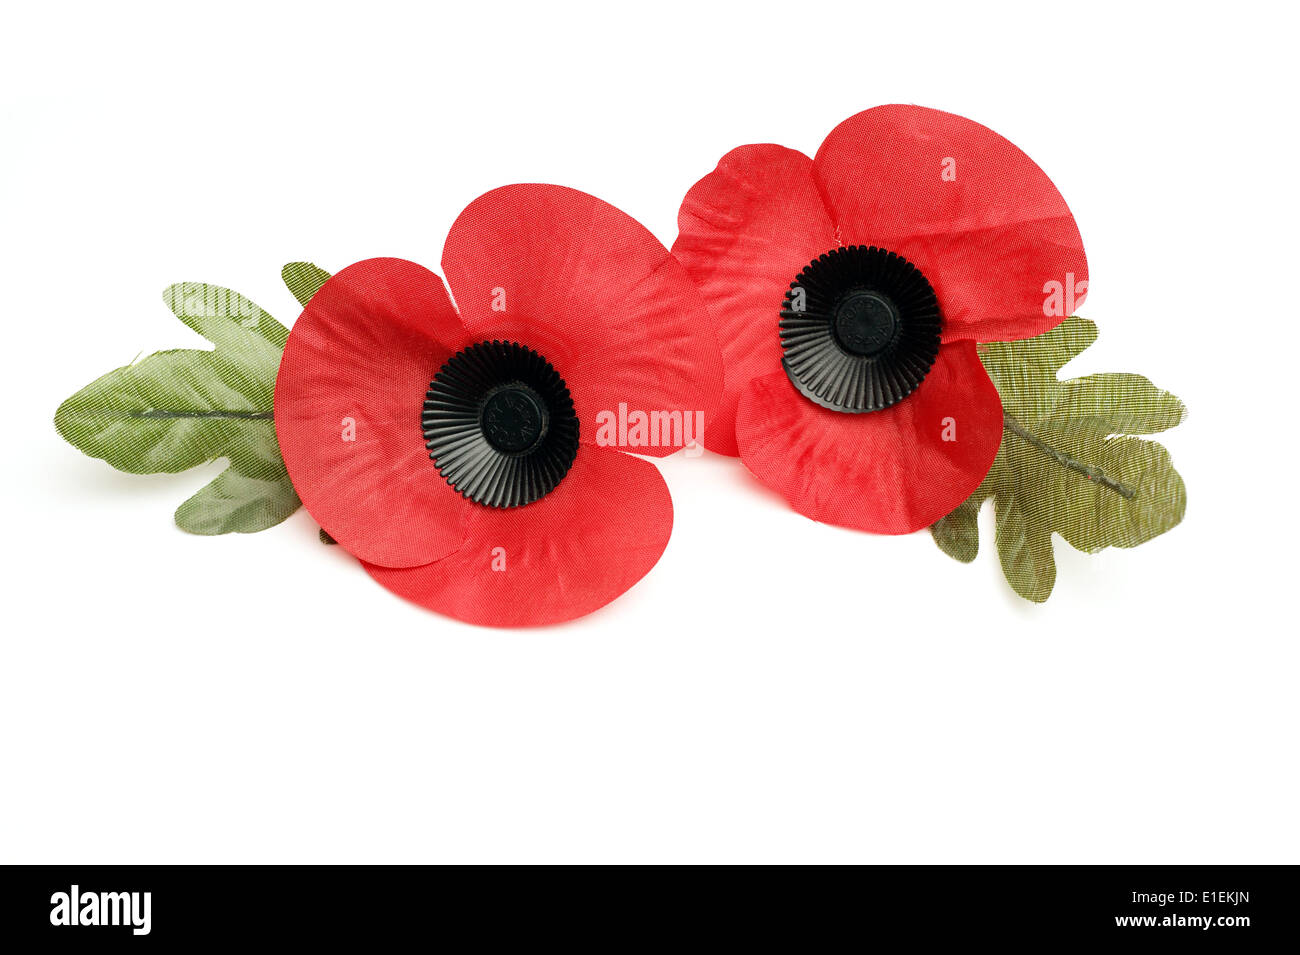 2 Poppies on a white background the poppy emblem for remembrance & memory of the fallen in wars of the past & ongoing campaigns Stock Photo